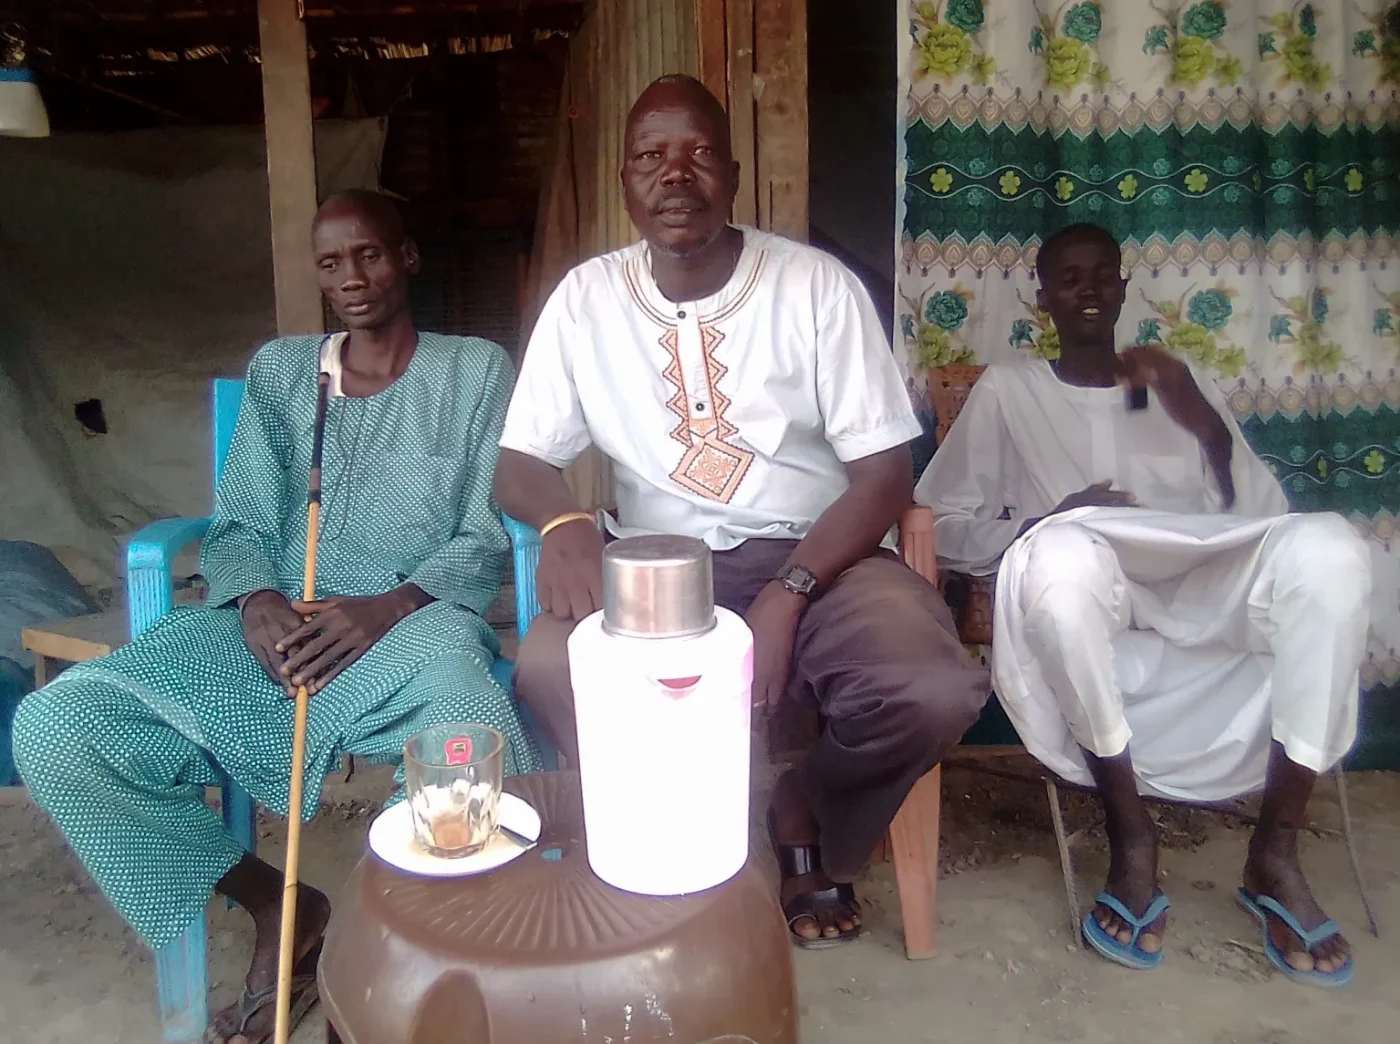 Networking, leisure: why South Sudanese youths frequent tea places